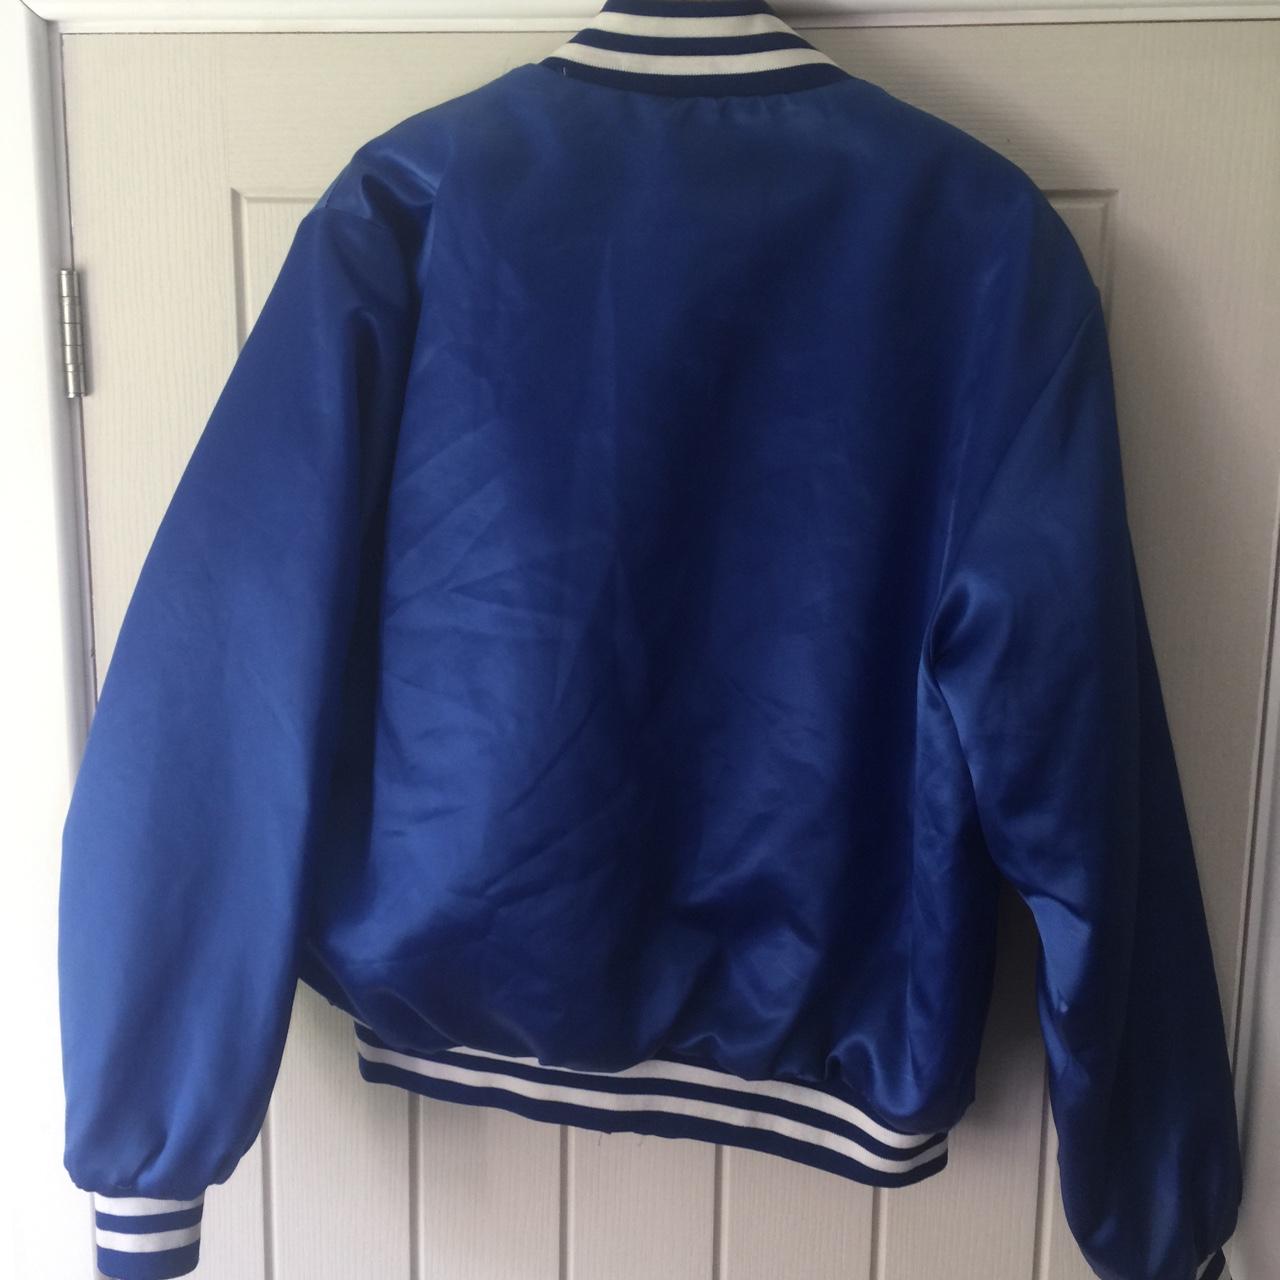 Bright blue bomber jacket. Size Large, could fit a ... - Depop